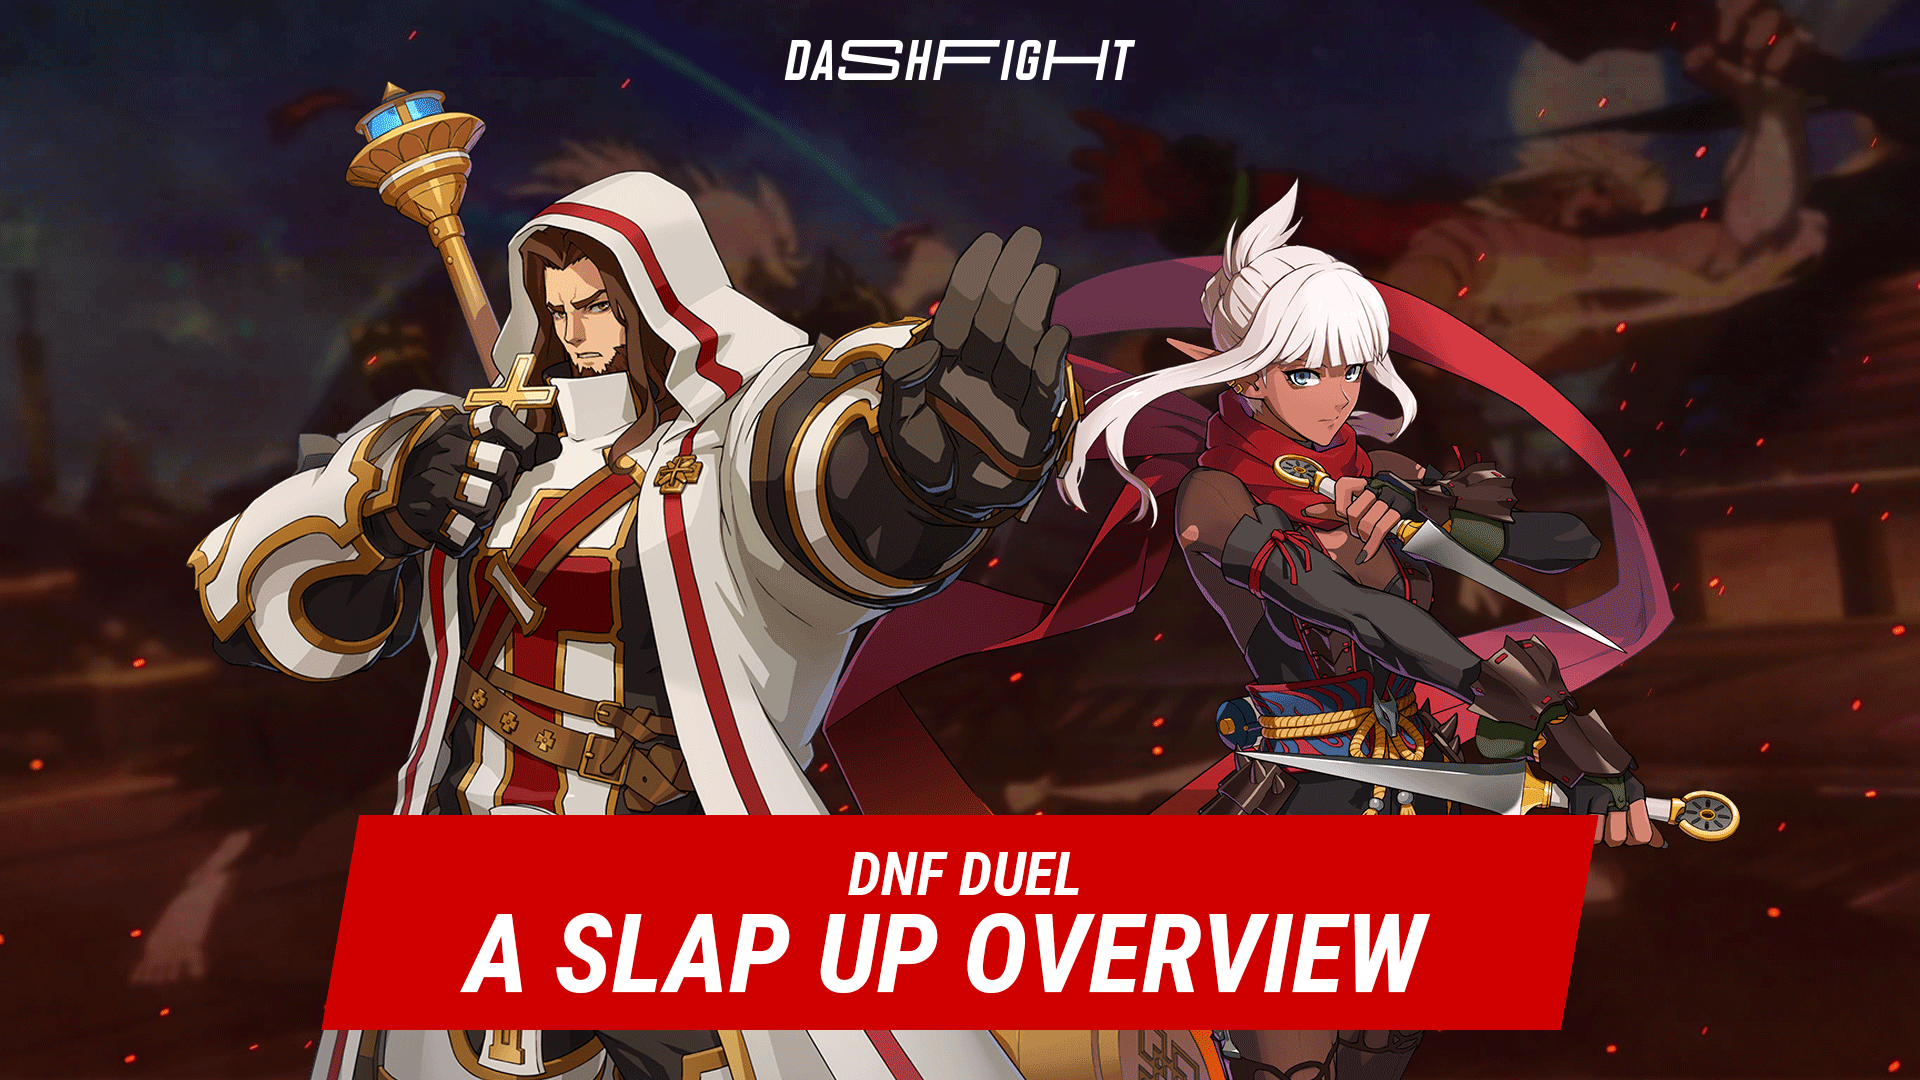 DNF Duel: A Slap Up Overview